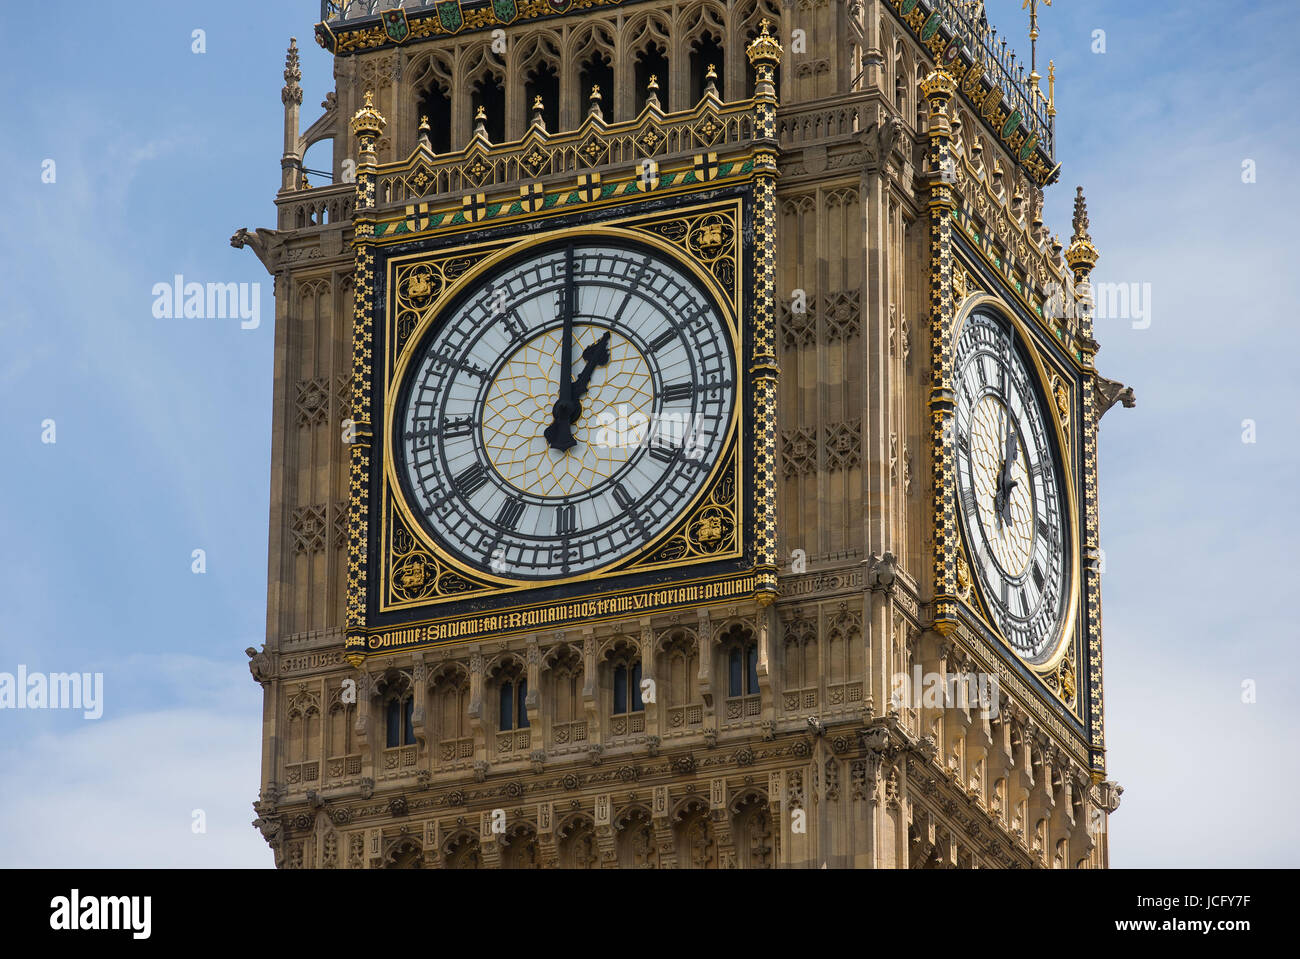 The clock face at the Elizabeth Tower, home to the bell Big Ben